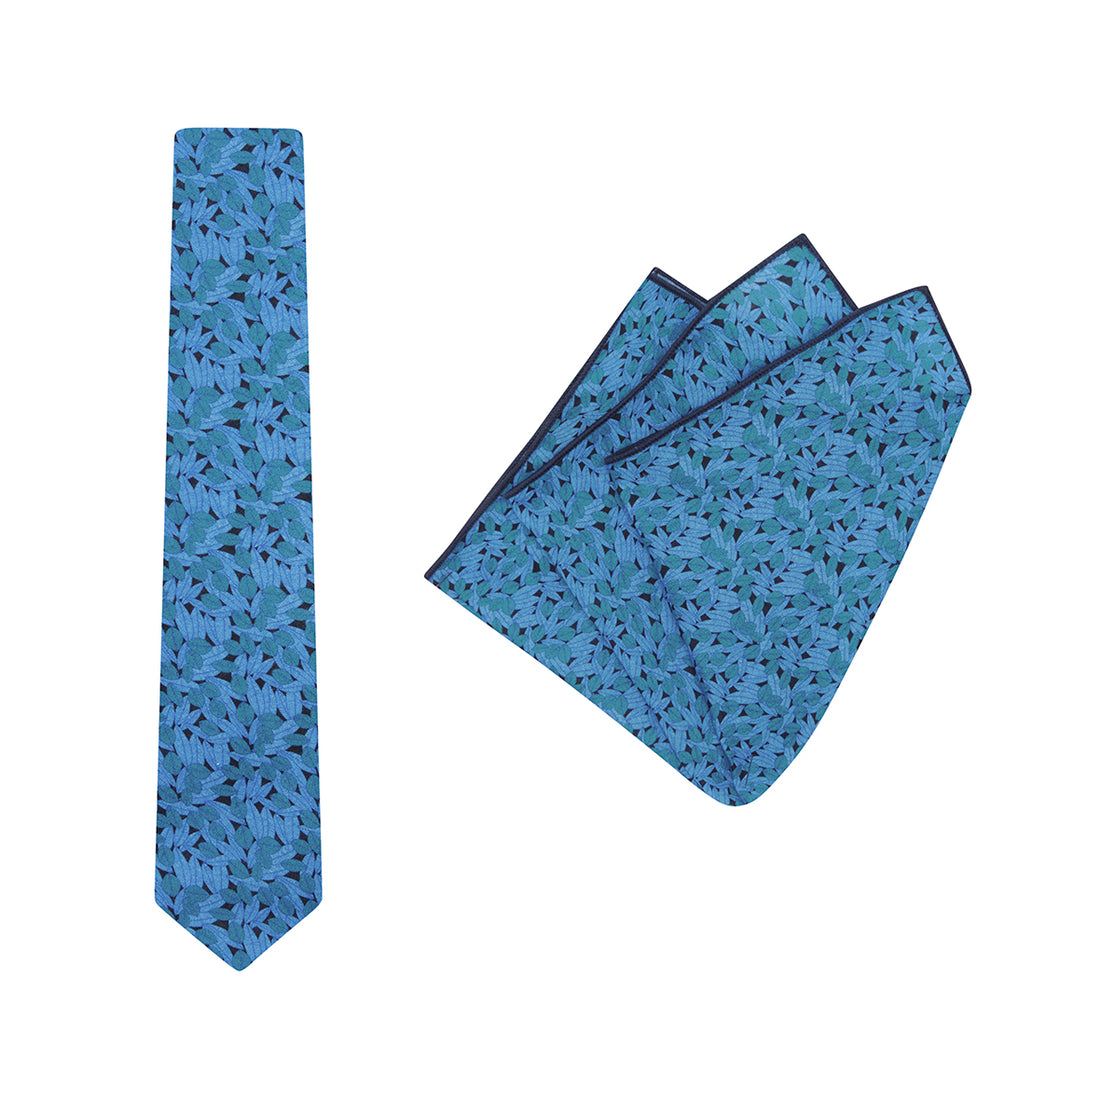 TIE + POCKET SQUARE SET. Jocelyn Proust Lined Leaves Print. Navy/Blue. Supplied with matching pocket square.-Ties-PEROZ Accessories